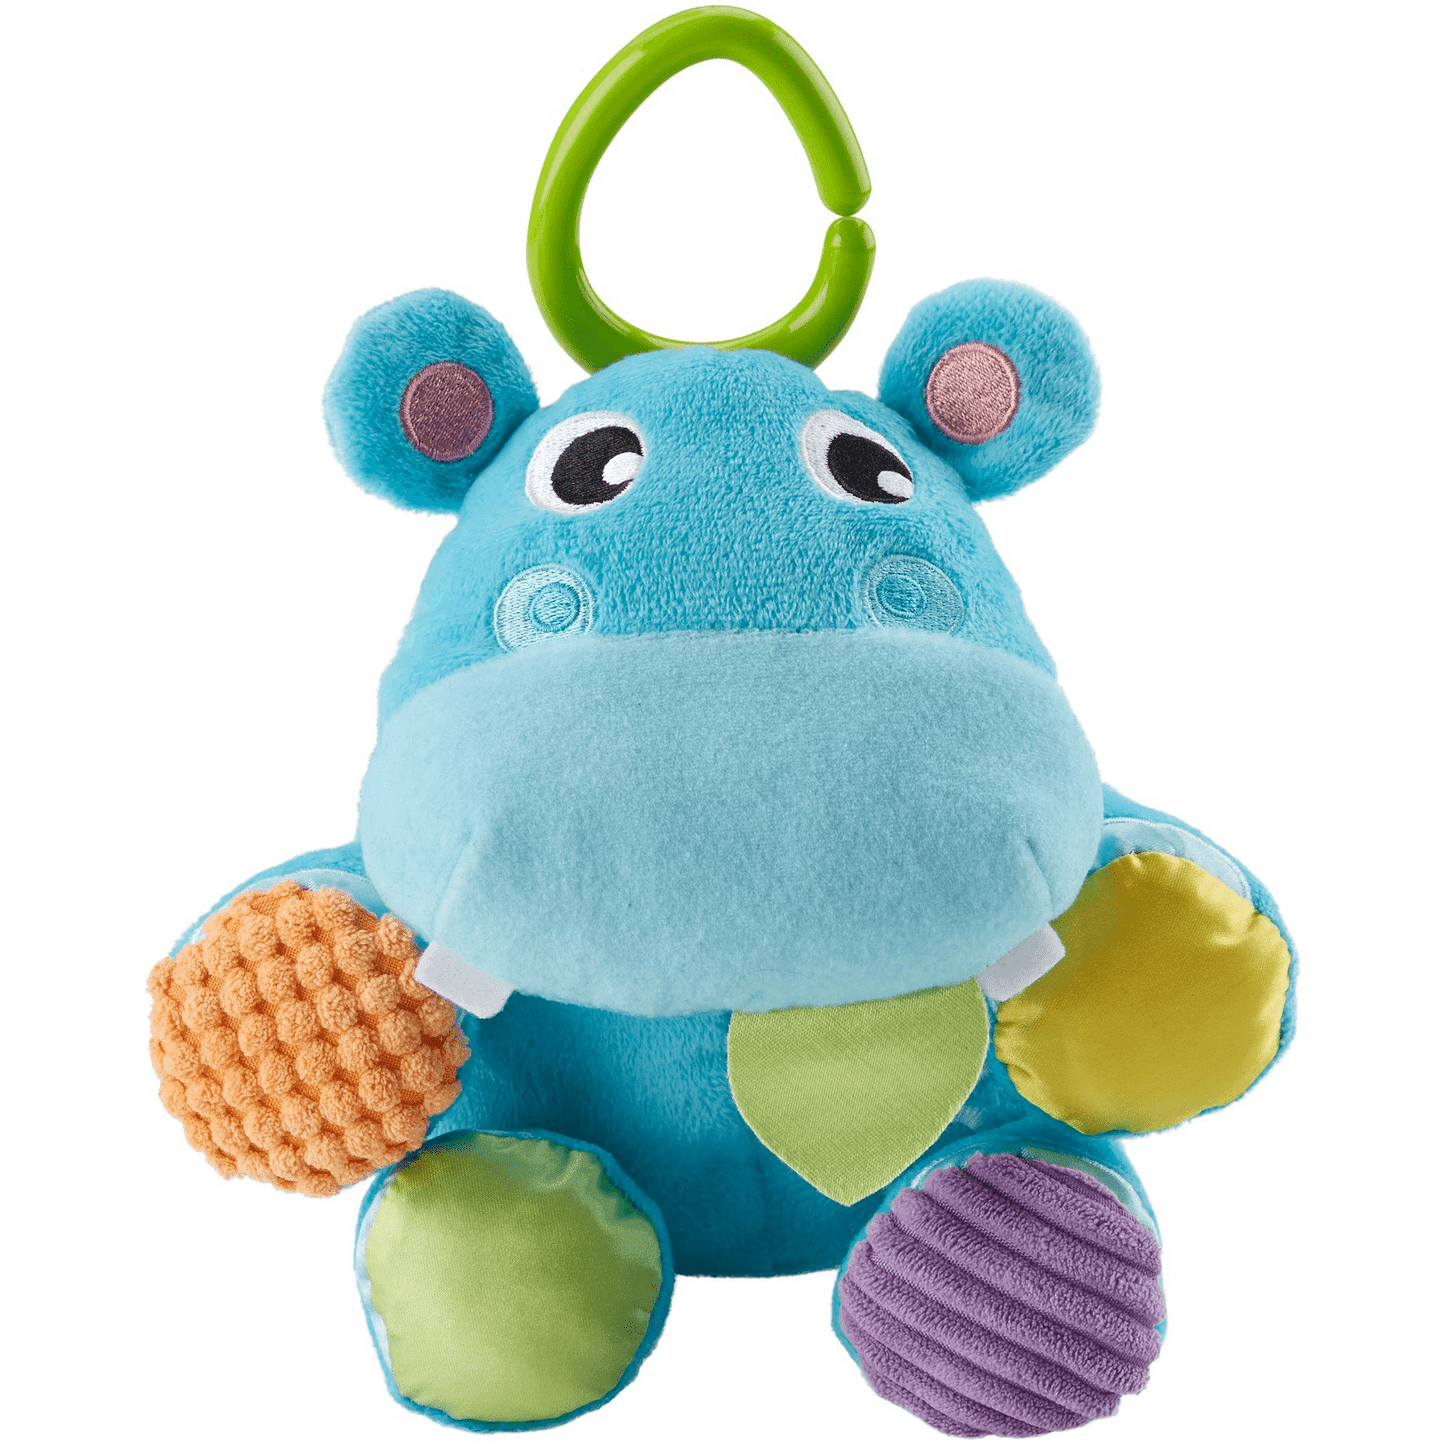 Fisher Price Have A Ball Hippo - Plush Hippo Pal with Satiny & Soft Fabrics, 2 Toys in 1!